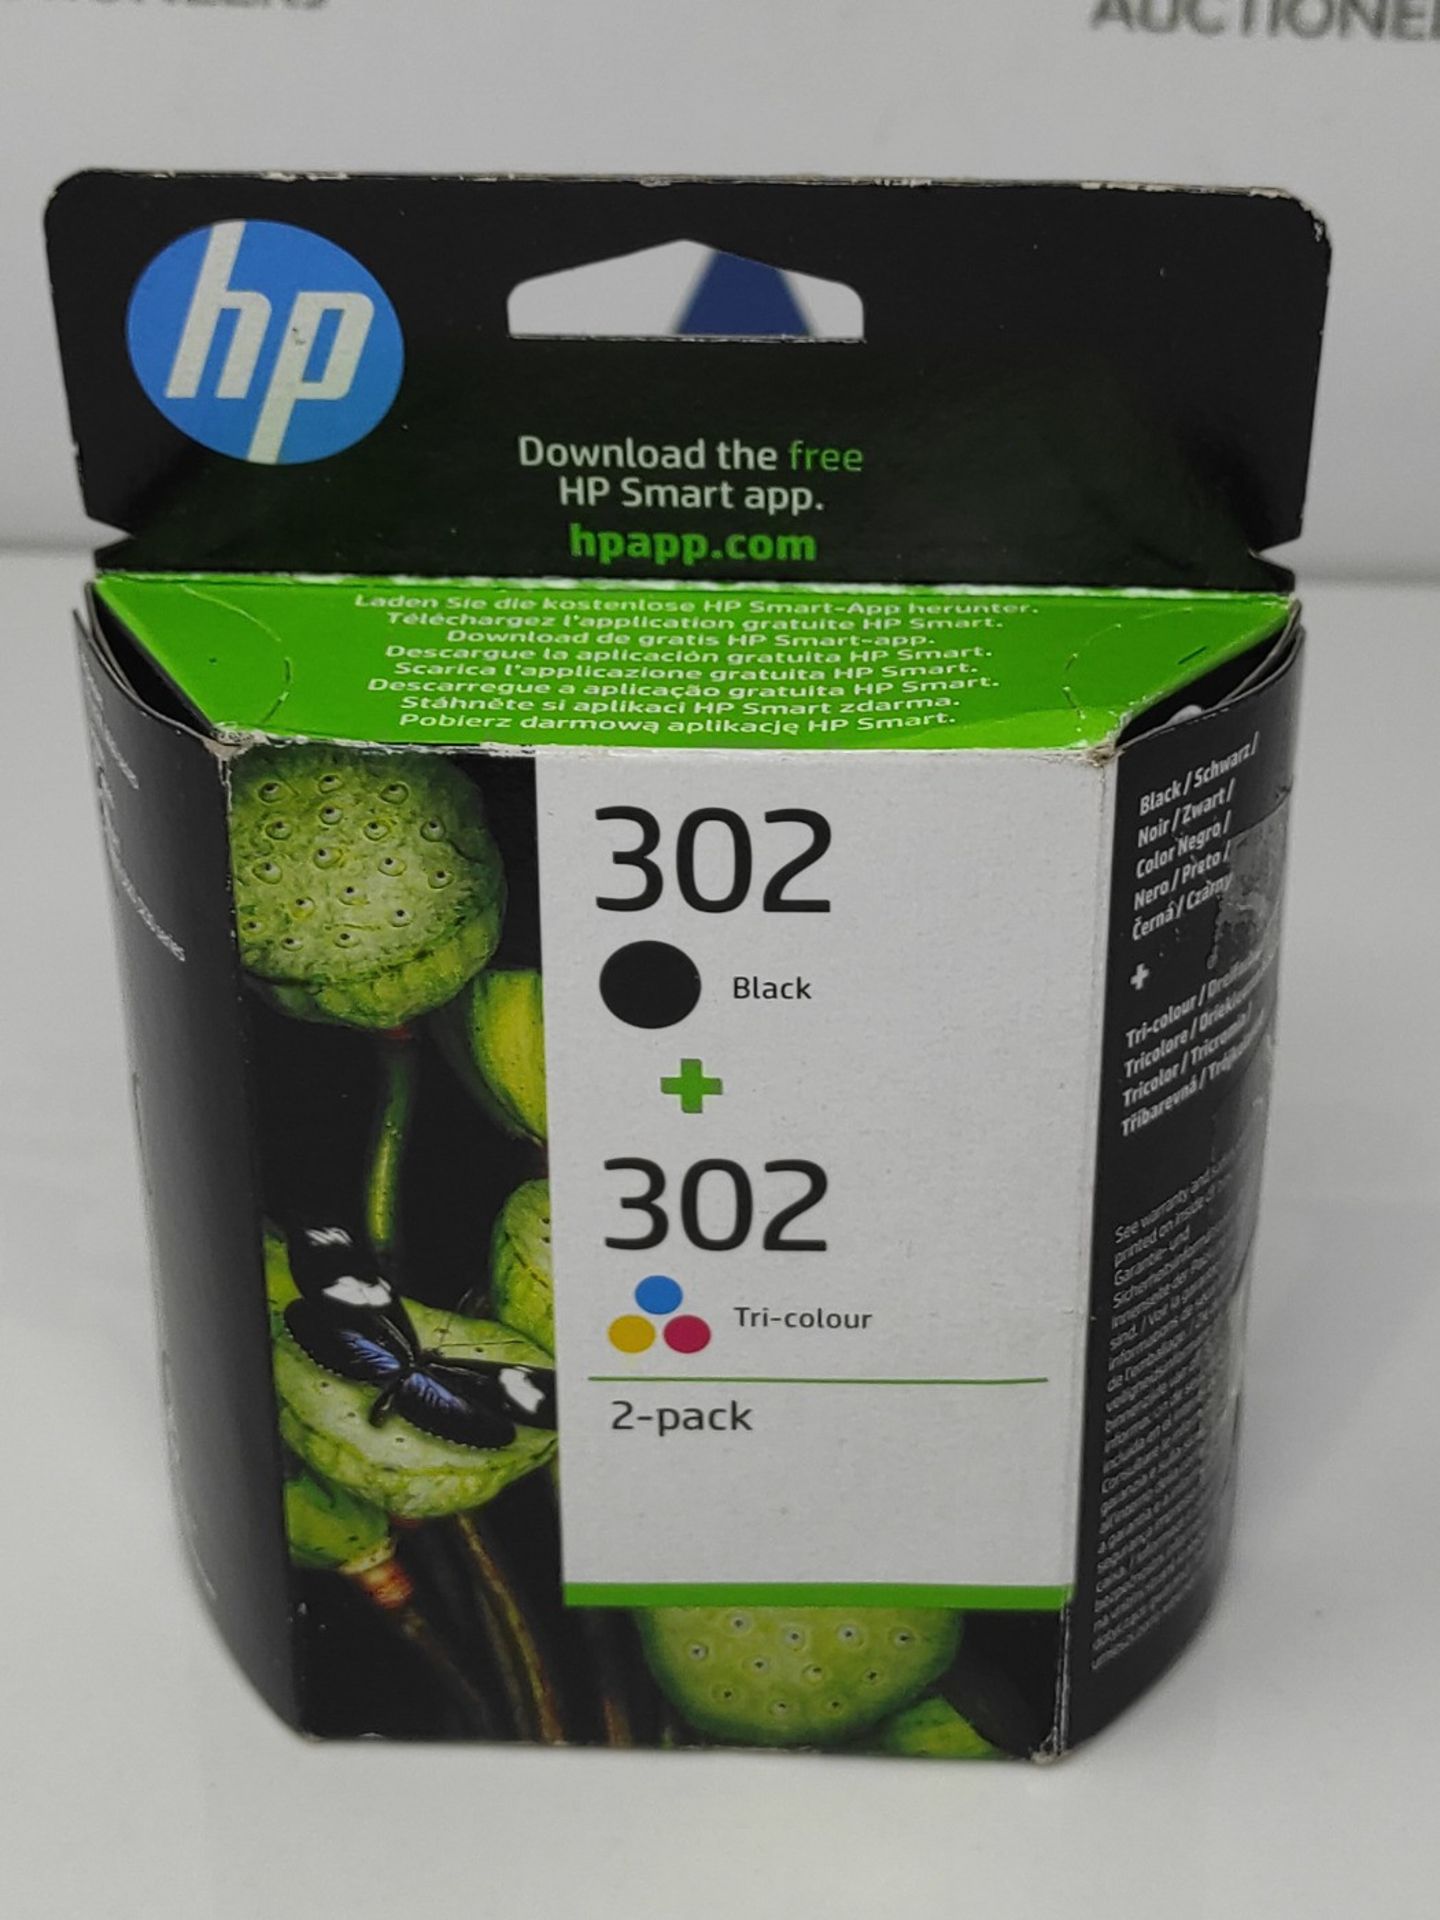 HP X4D37AE 302 Original Ink Cartridges, Black and Tri-color, 2 Count (Pack of 1) - Image 2 of 3